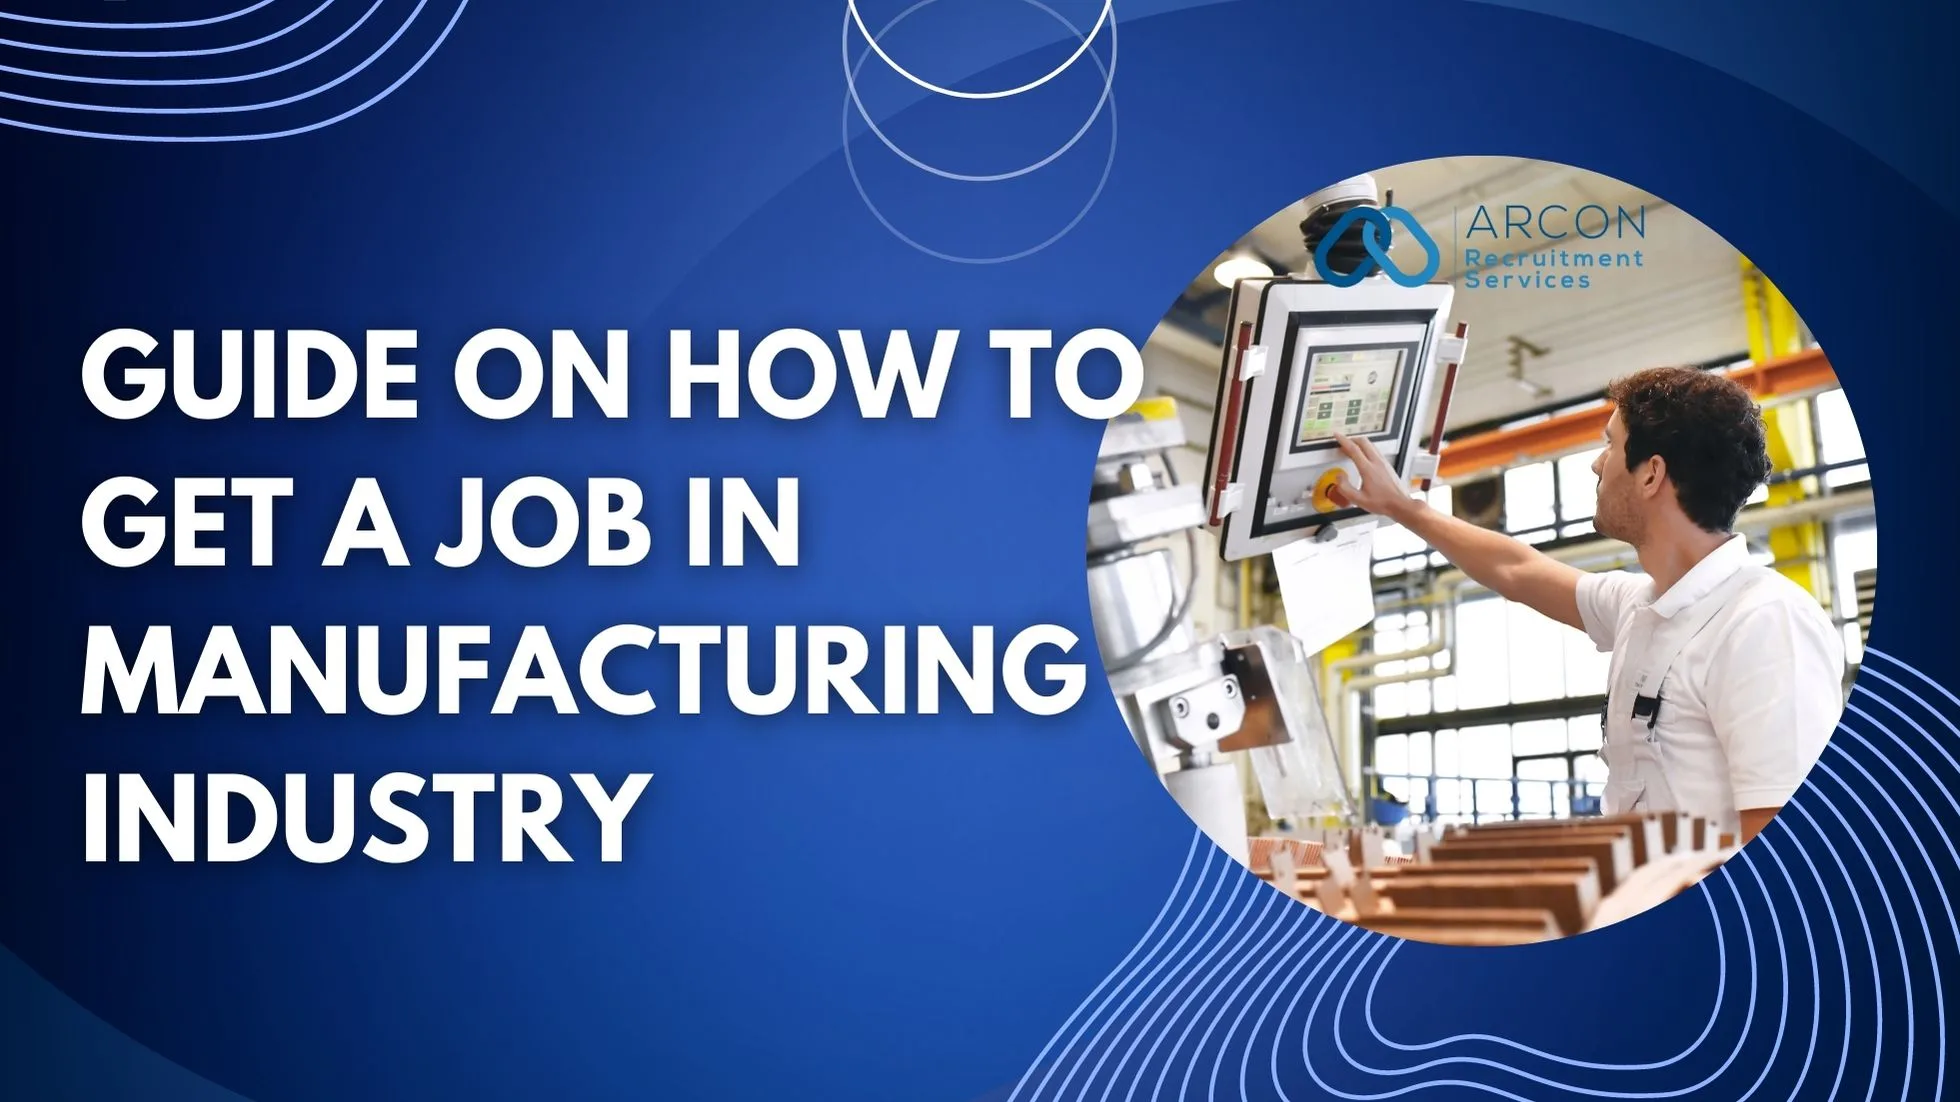 Guide on How to get a Job in Manufacturing Industry with Arcon Recuitment Services